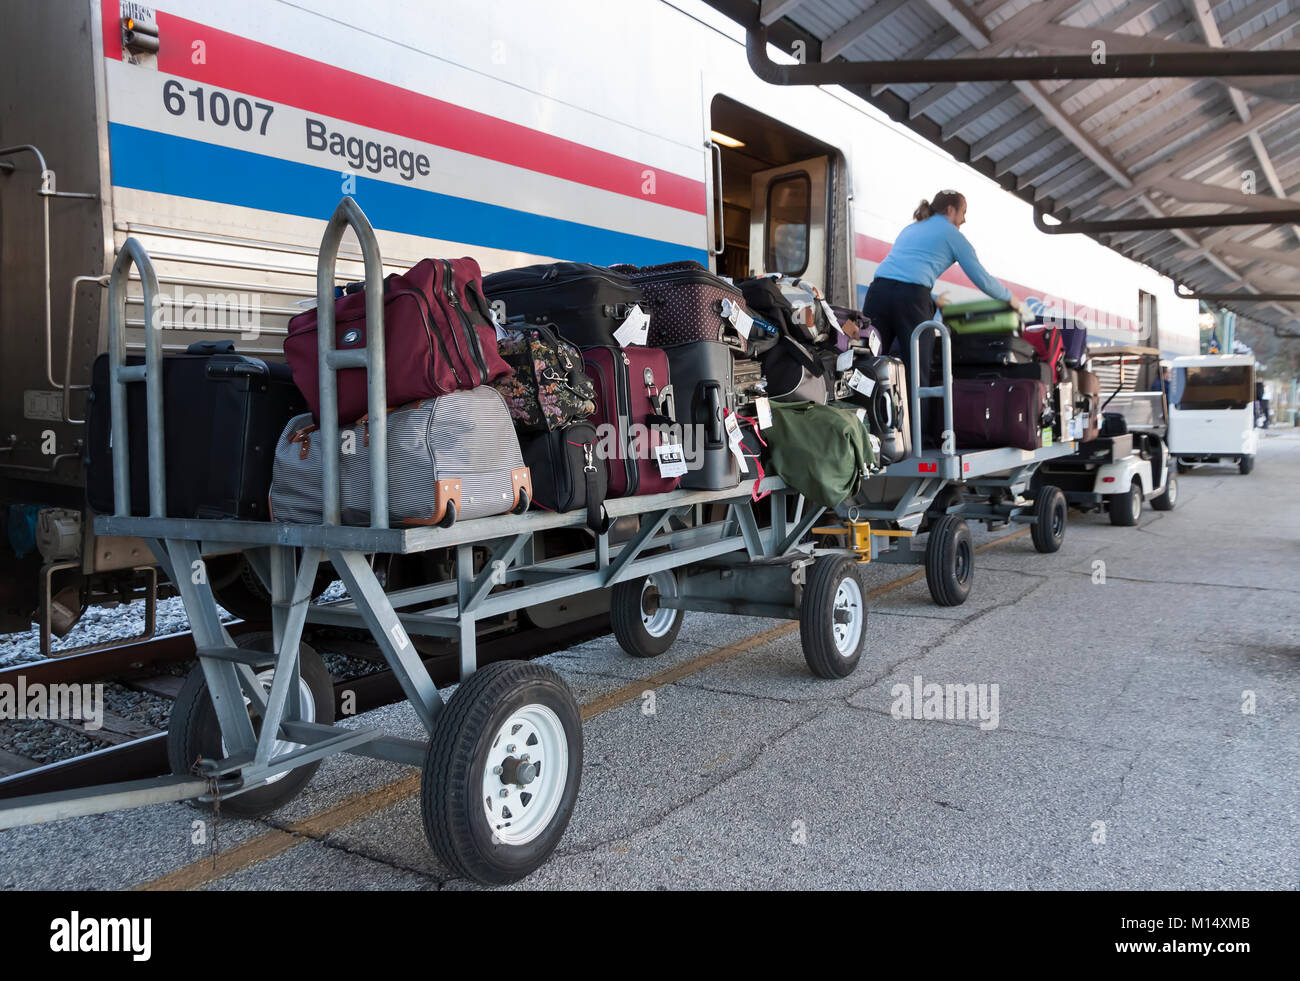 Amtrak porter loading luggage into the baggage car at a station in Tampa, Florida. Stock Photo